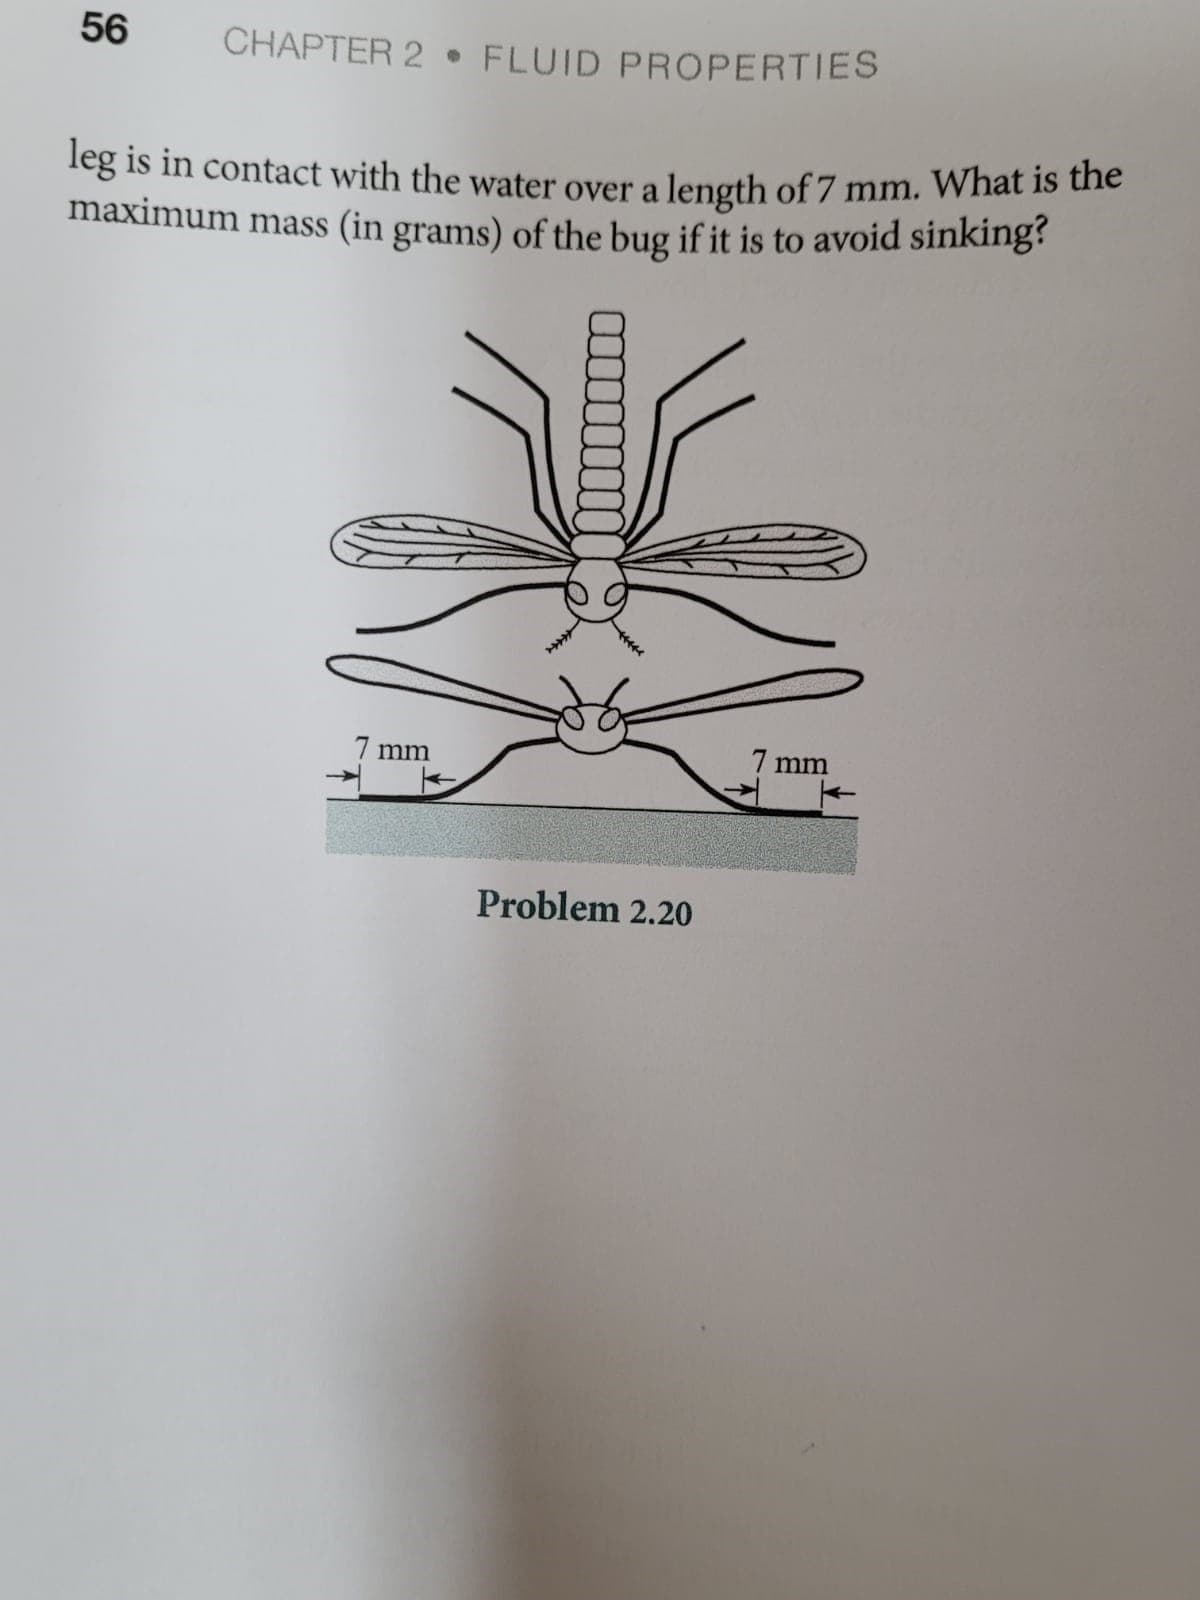 56
CHAPTER 2 • FLUID PROPERTIES
leg is in contact with the water over a length of 7 mm. What is uhe
maximum mass (in grams) of the bug if it is to avoid sinking
7 mm
7 mm
Problem 2.20
